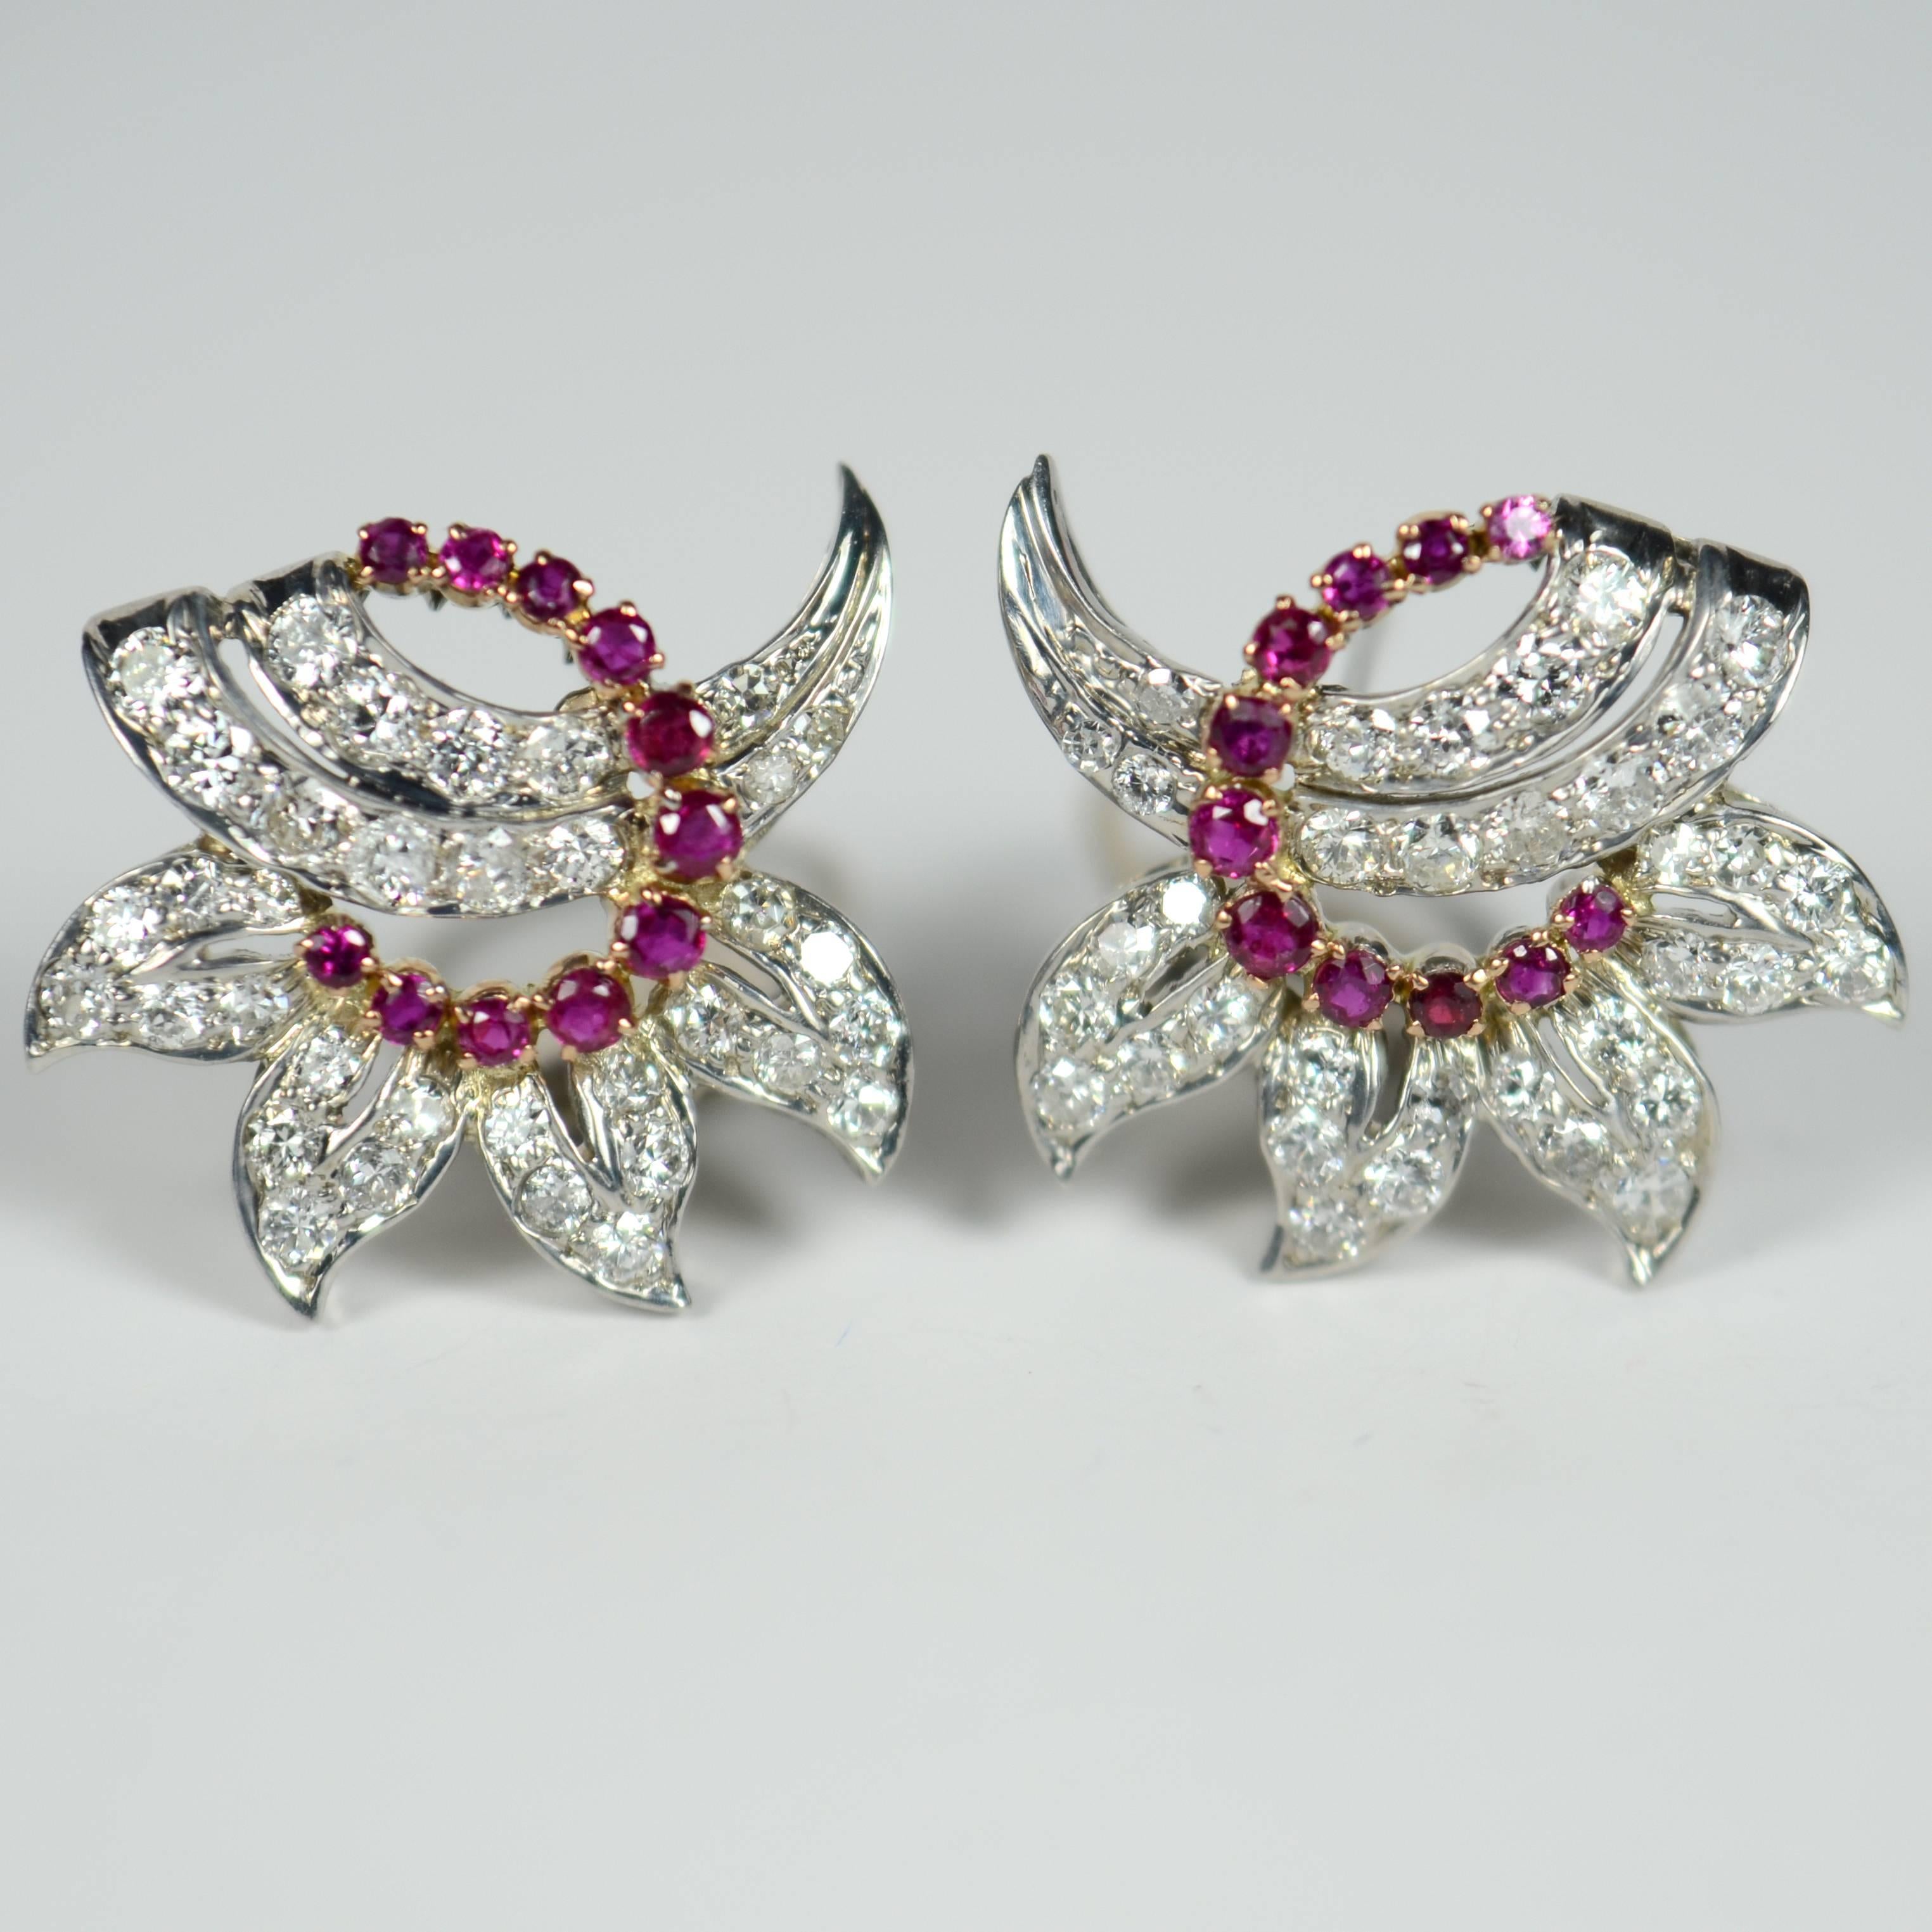 A pair of ruby and diamond ear clips designed as stylised diamond flowers with an intricate cut out design and a swirl of rubies.

 The rubies are set in 18 carat yellow gold and the diamonds are mounted in 18 carat white gold. 

The 22 natural